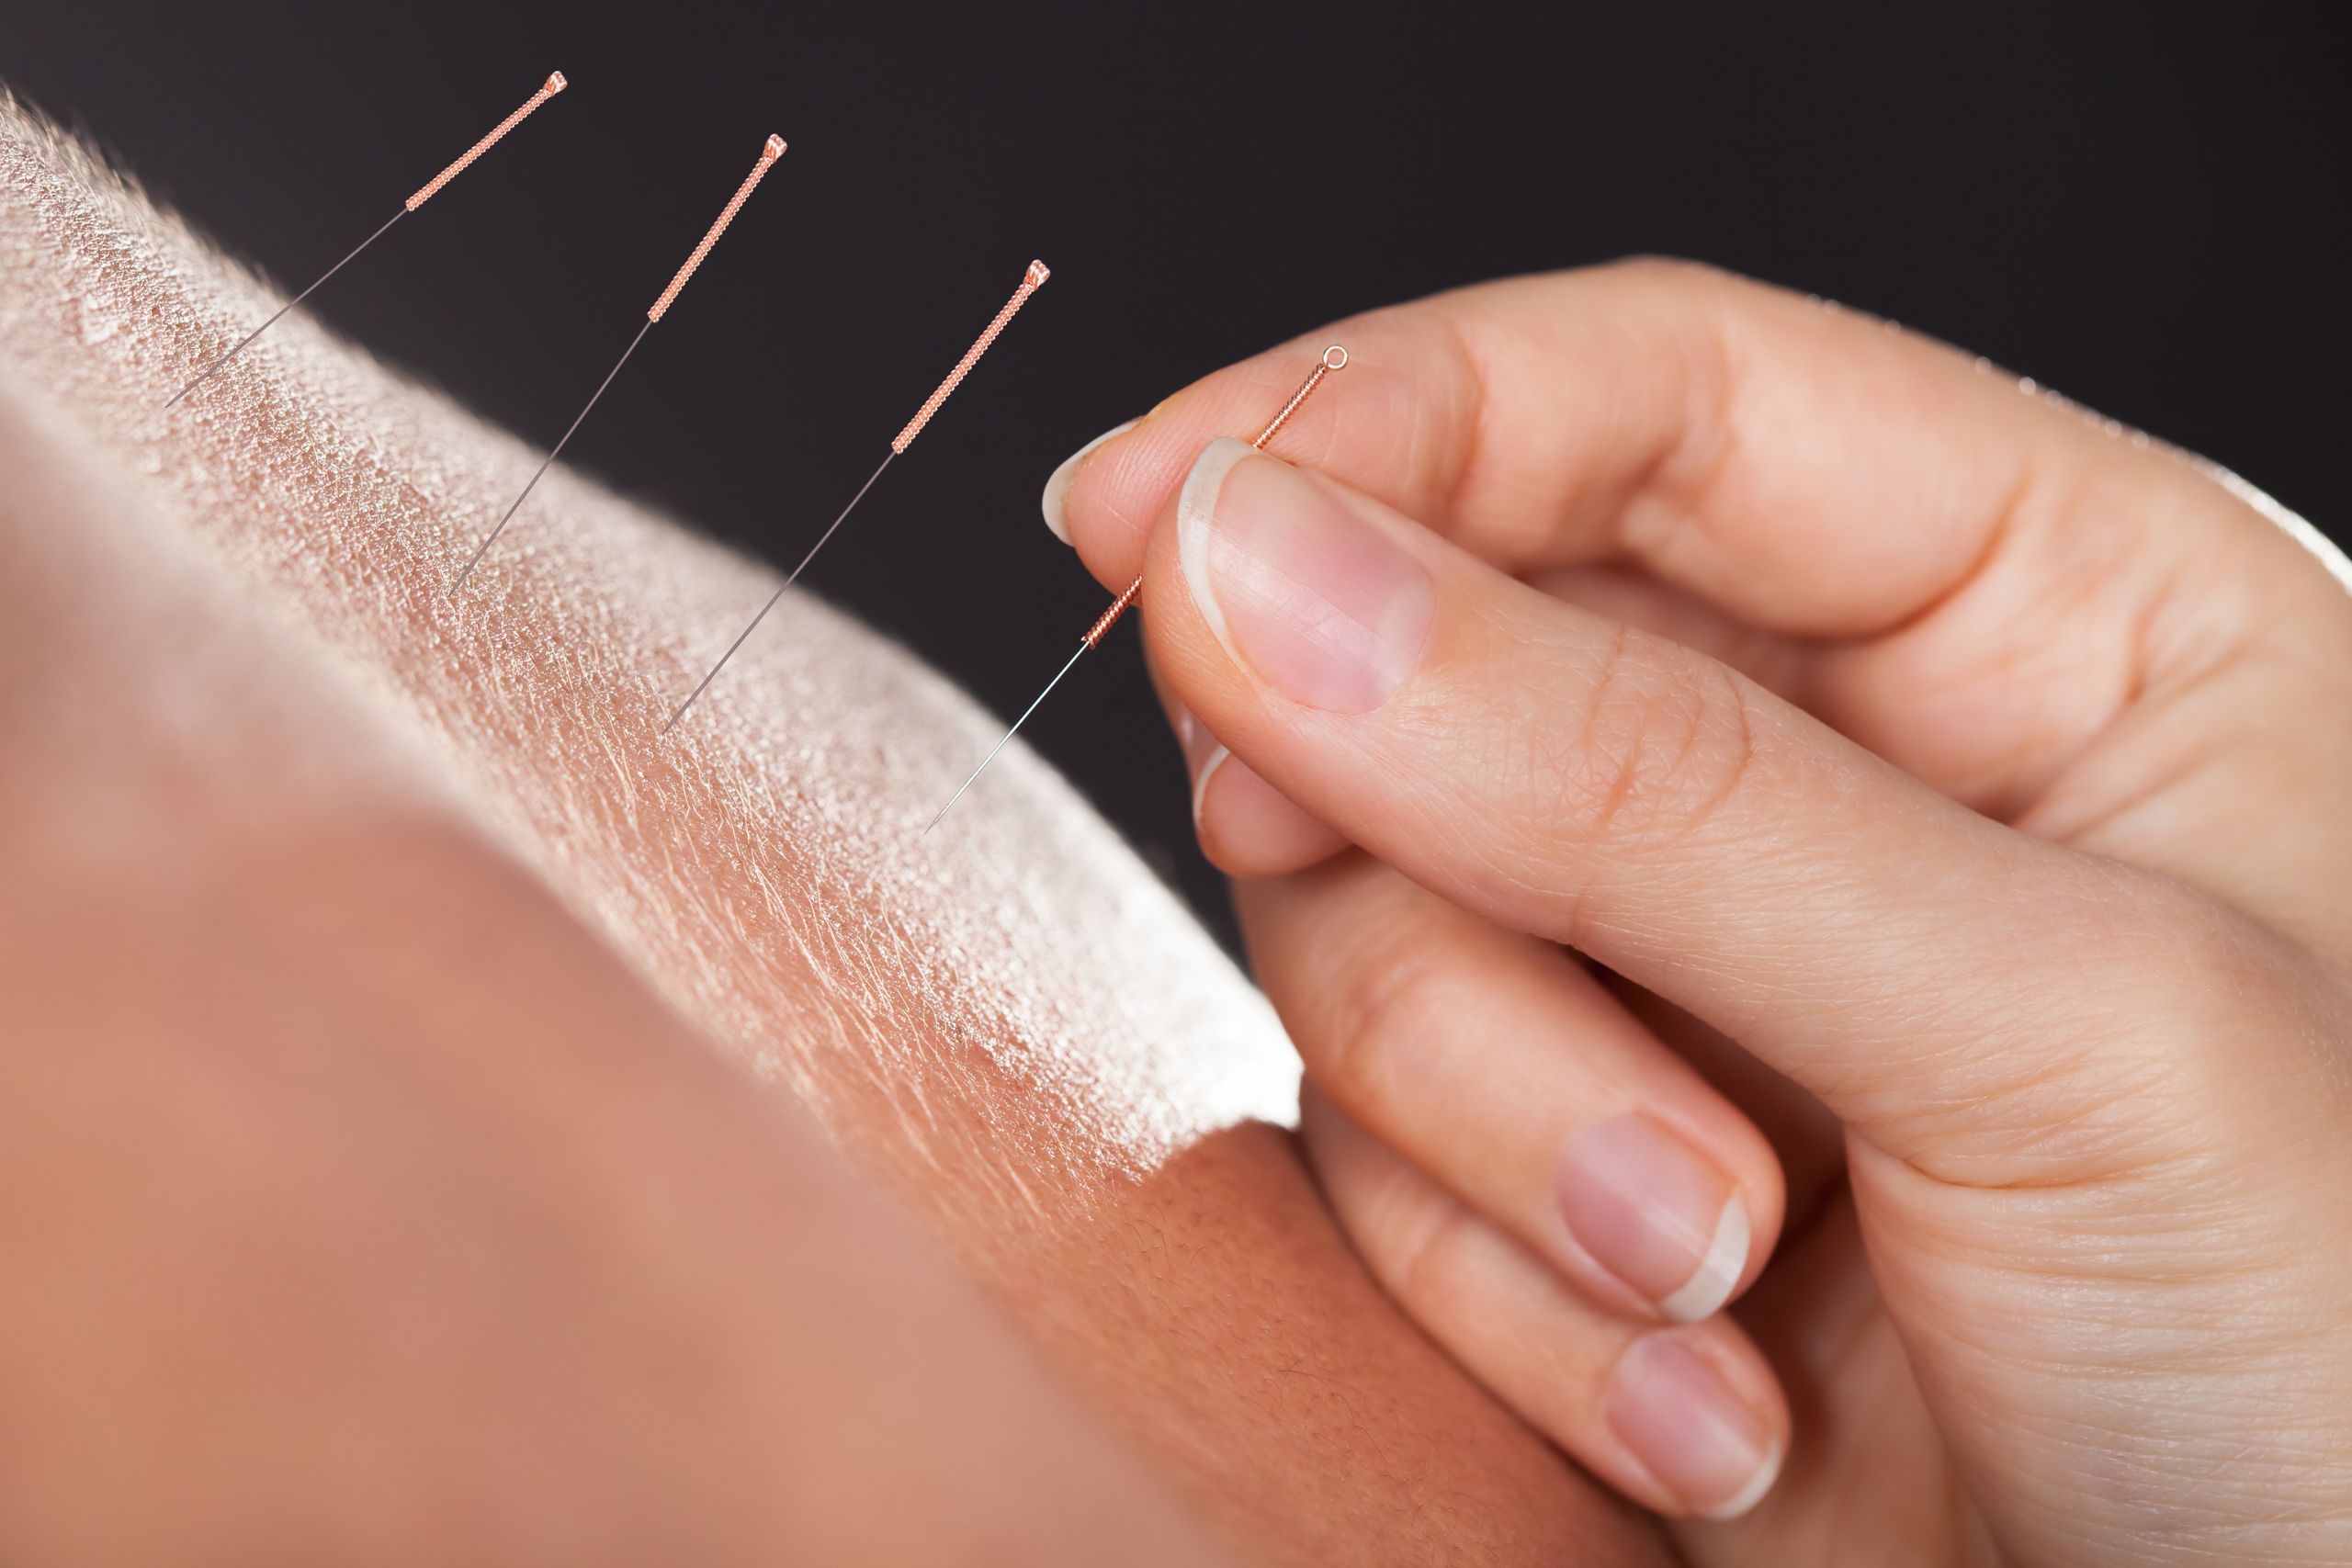 A close-up of a woman's hand applying acupuncture needles into skin